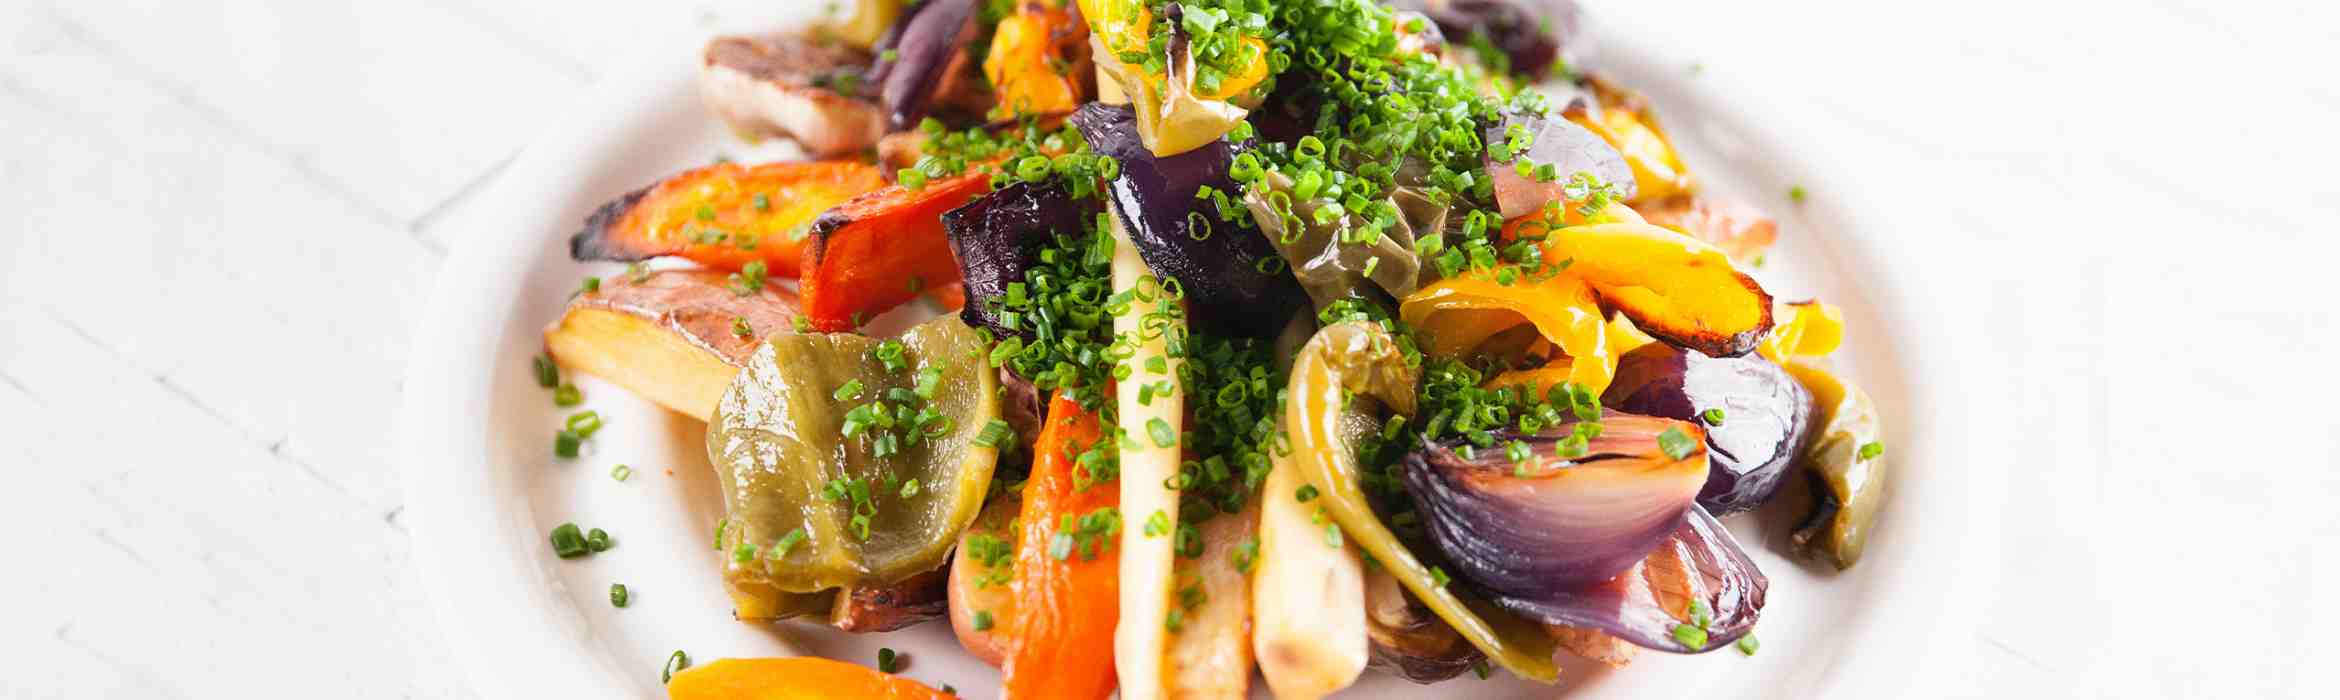 Duck Fat Roasted Vegetables Recipe